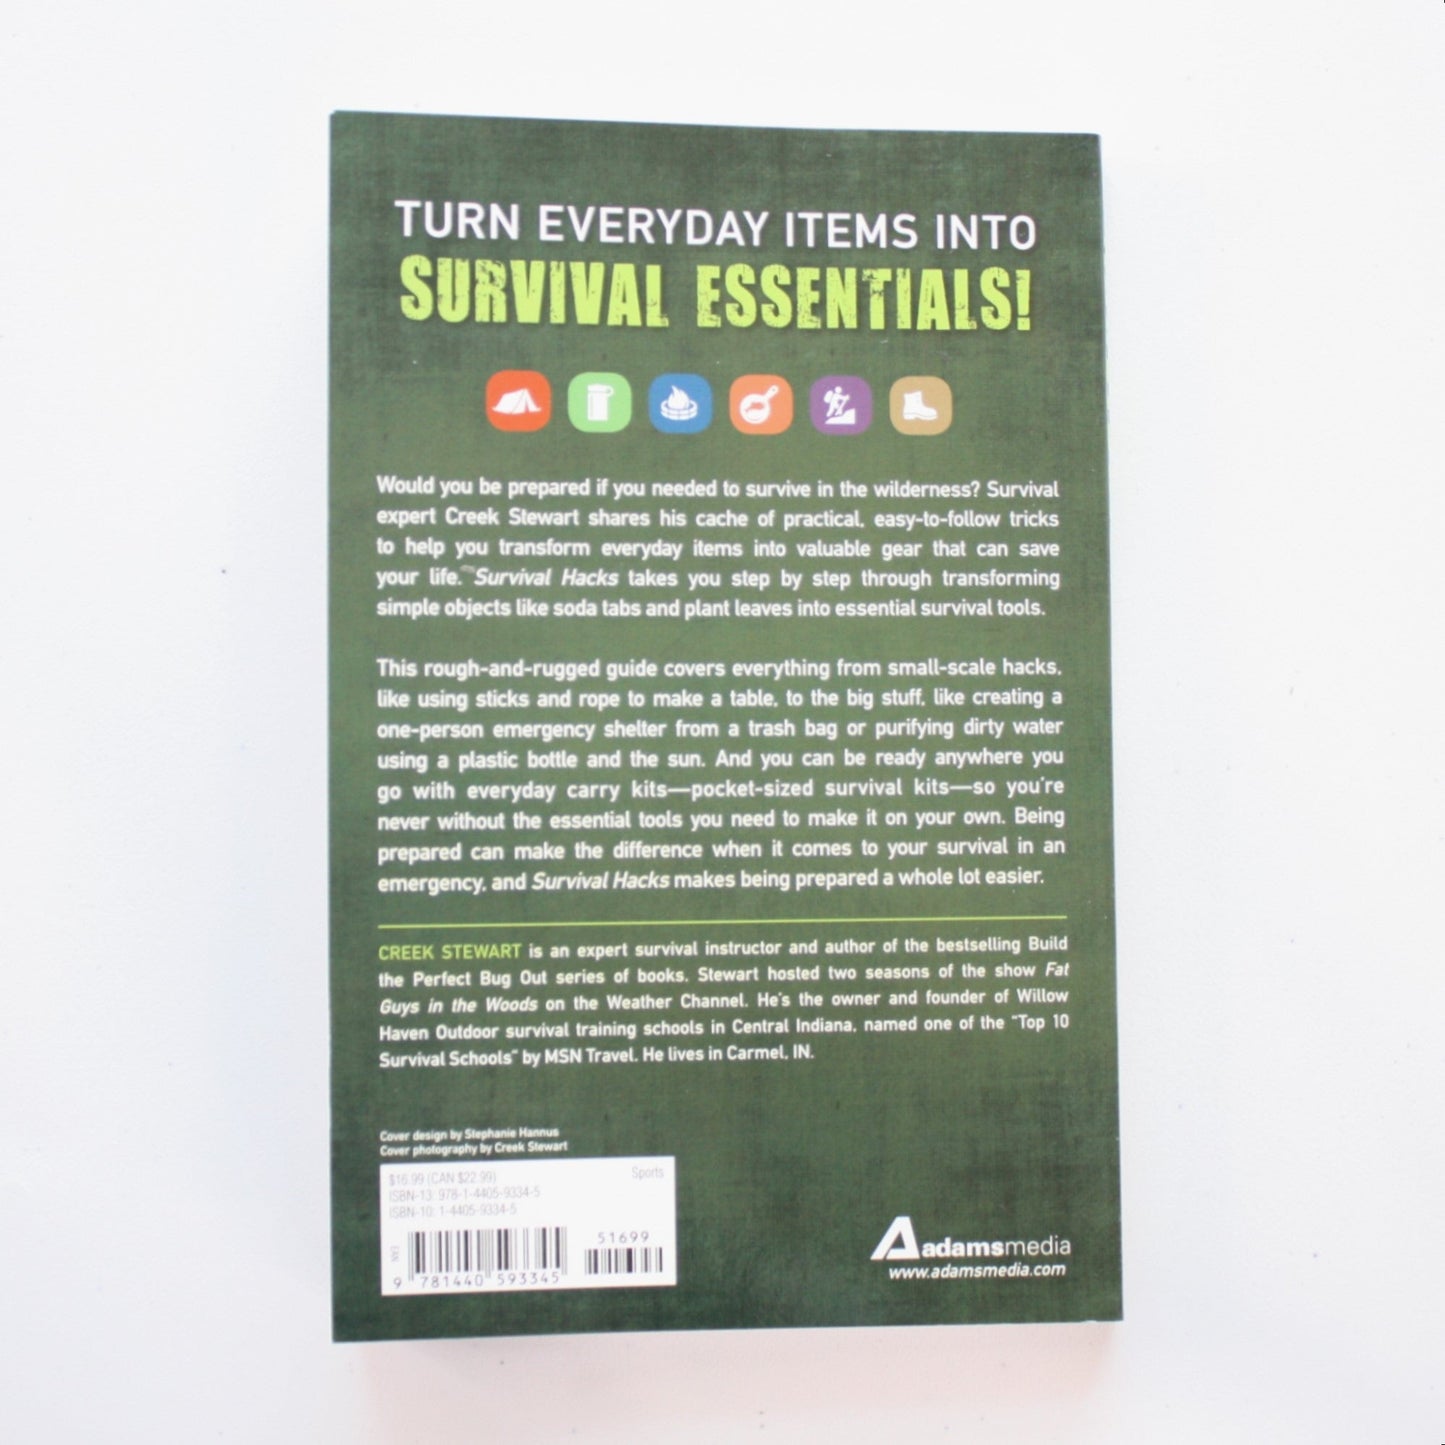 Survival Hacks: Everyday Items for Wilderness Survival - Made in the USA